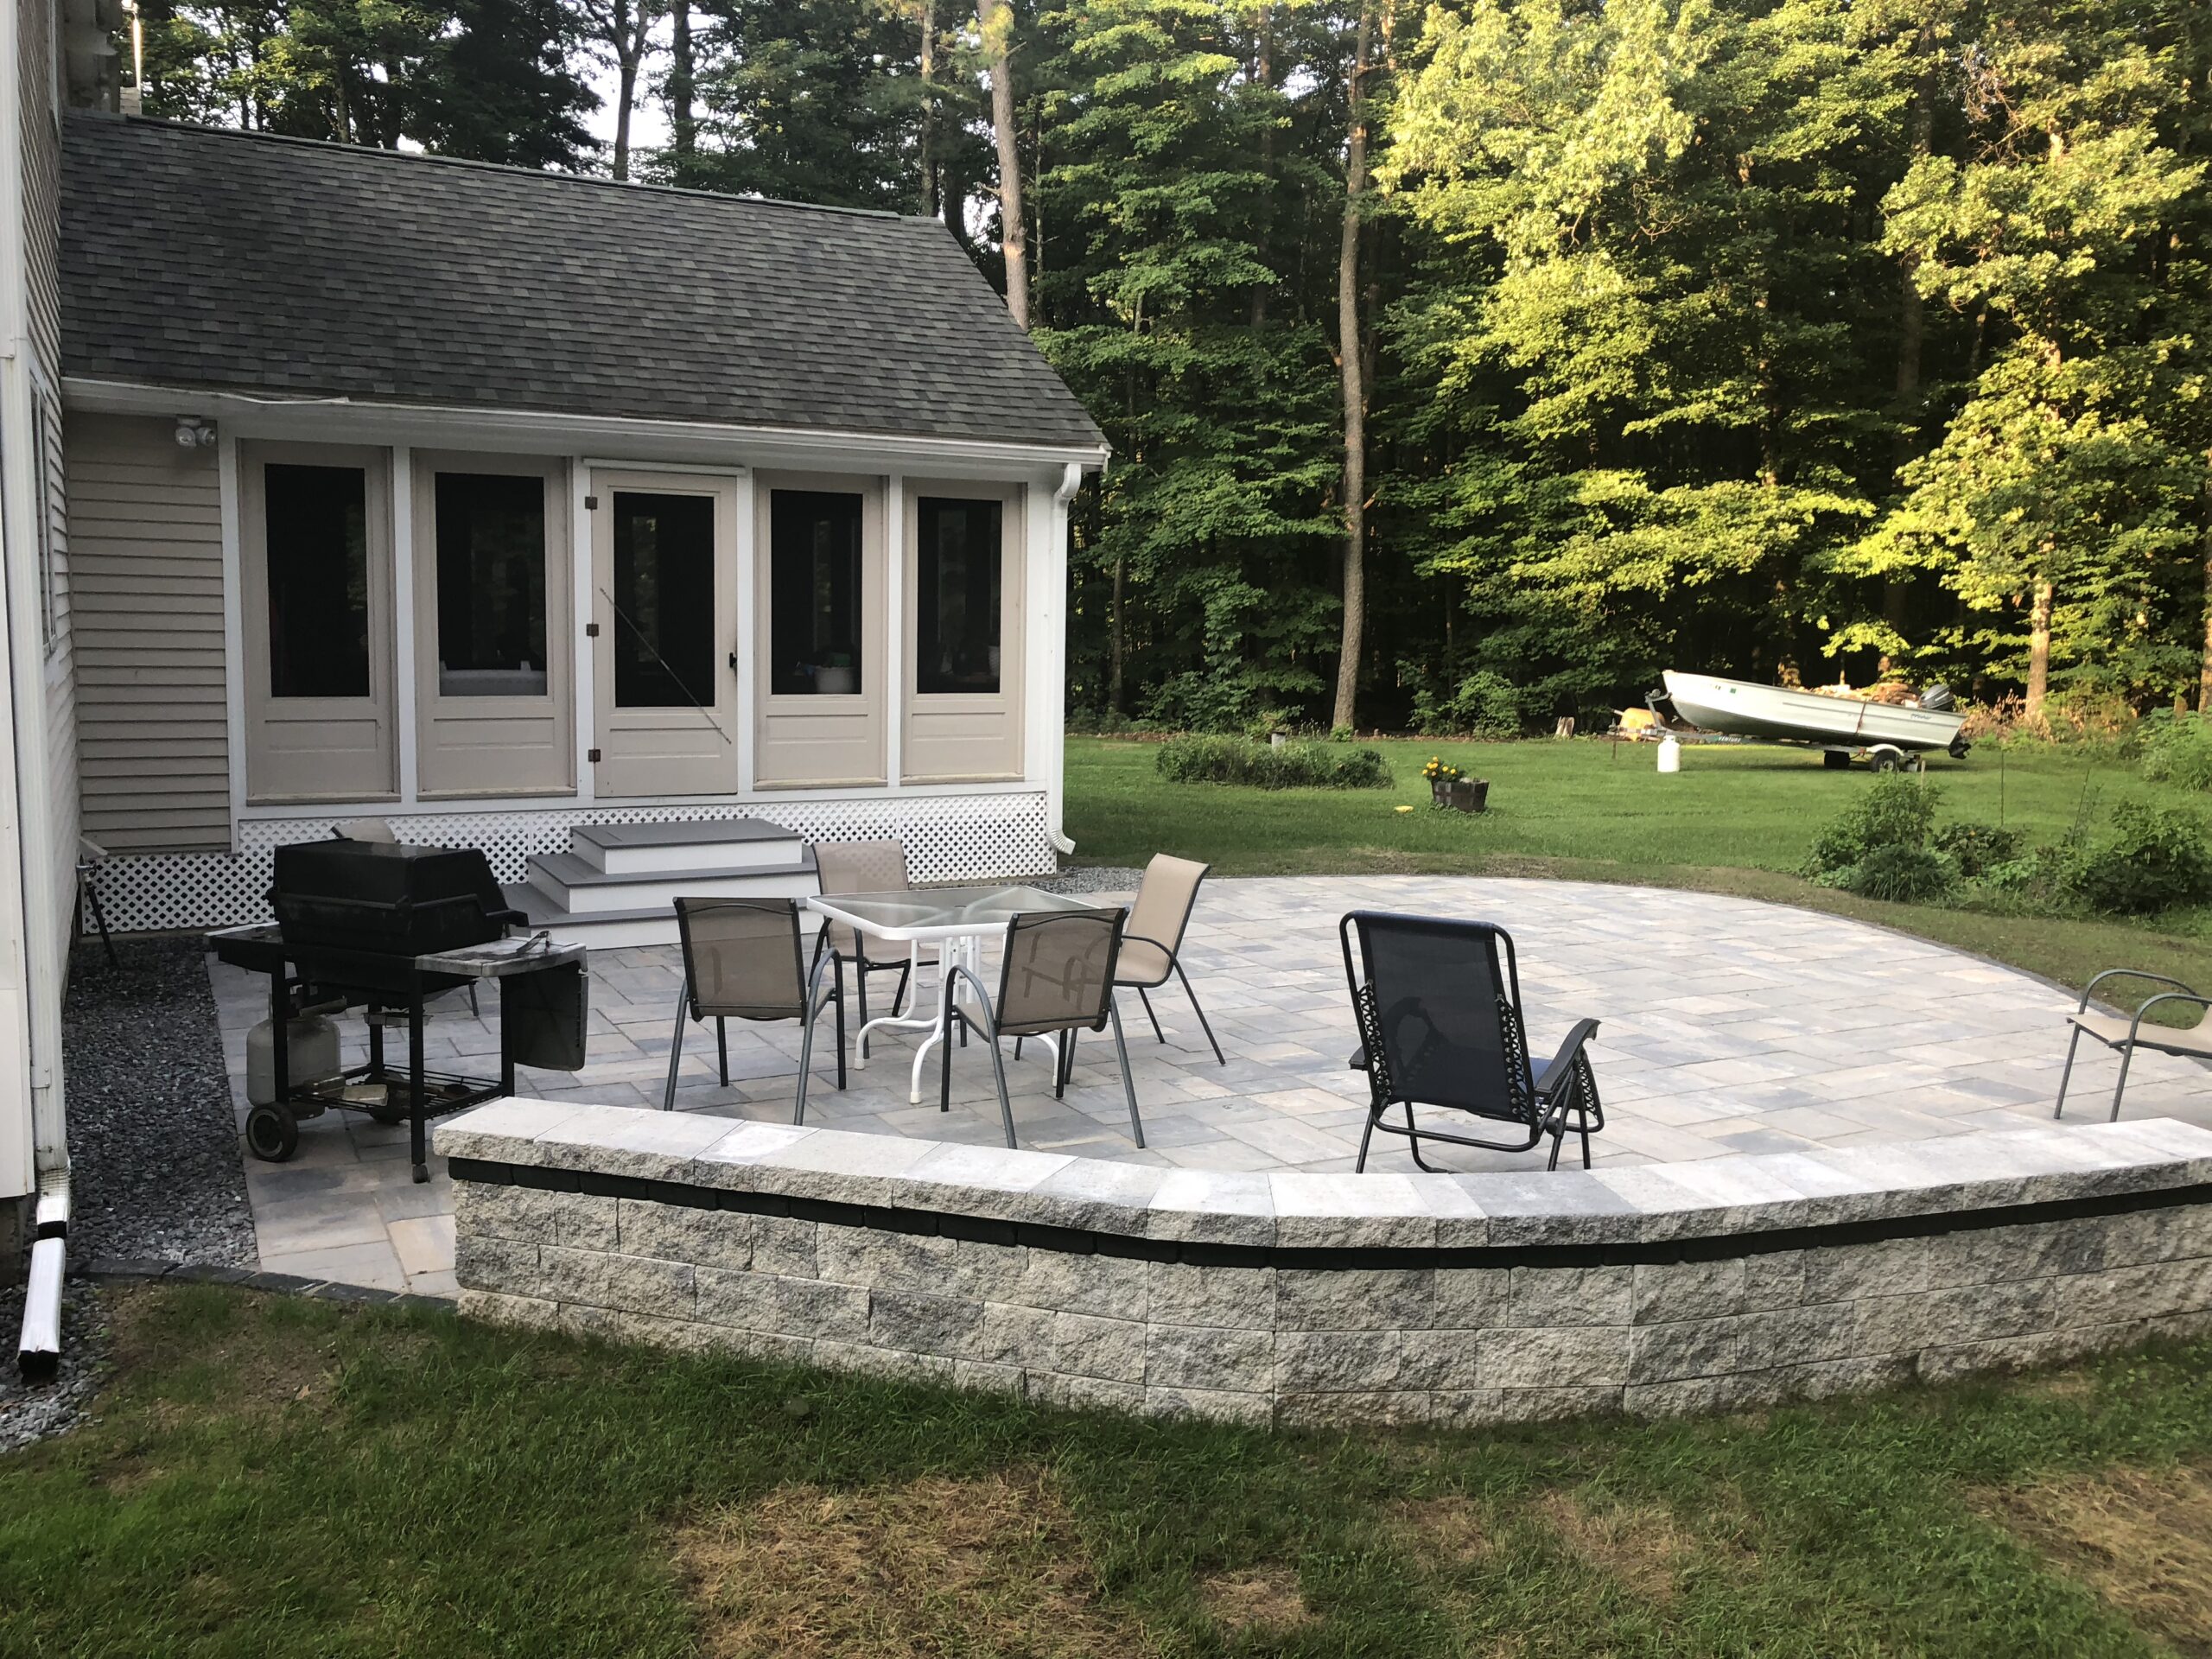 AFTER: CURVED STONE WALL FOR EXTRA SEATING SPACIOUS PATIO FOR RELAXING OR ENTERTAINING